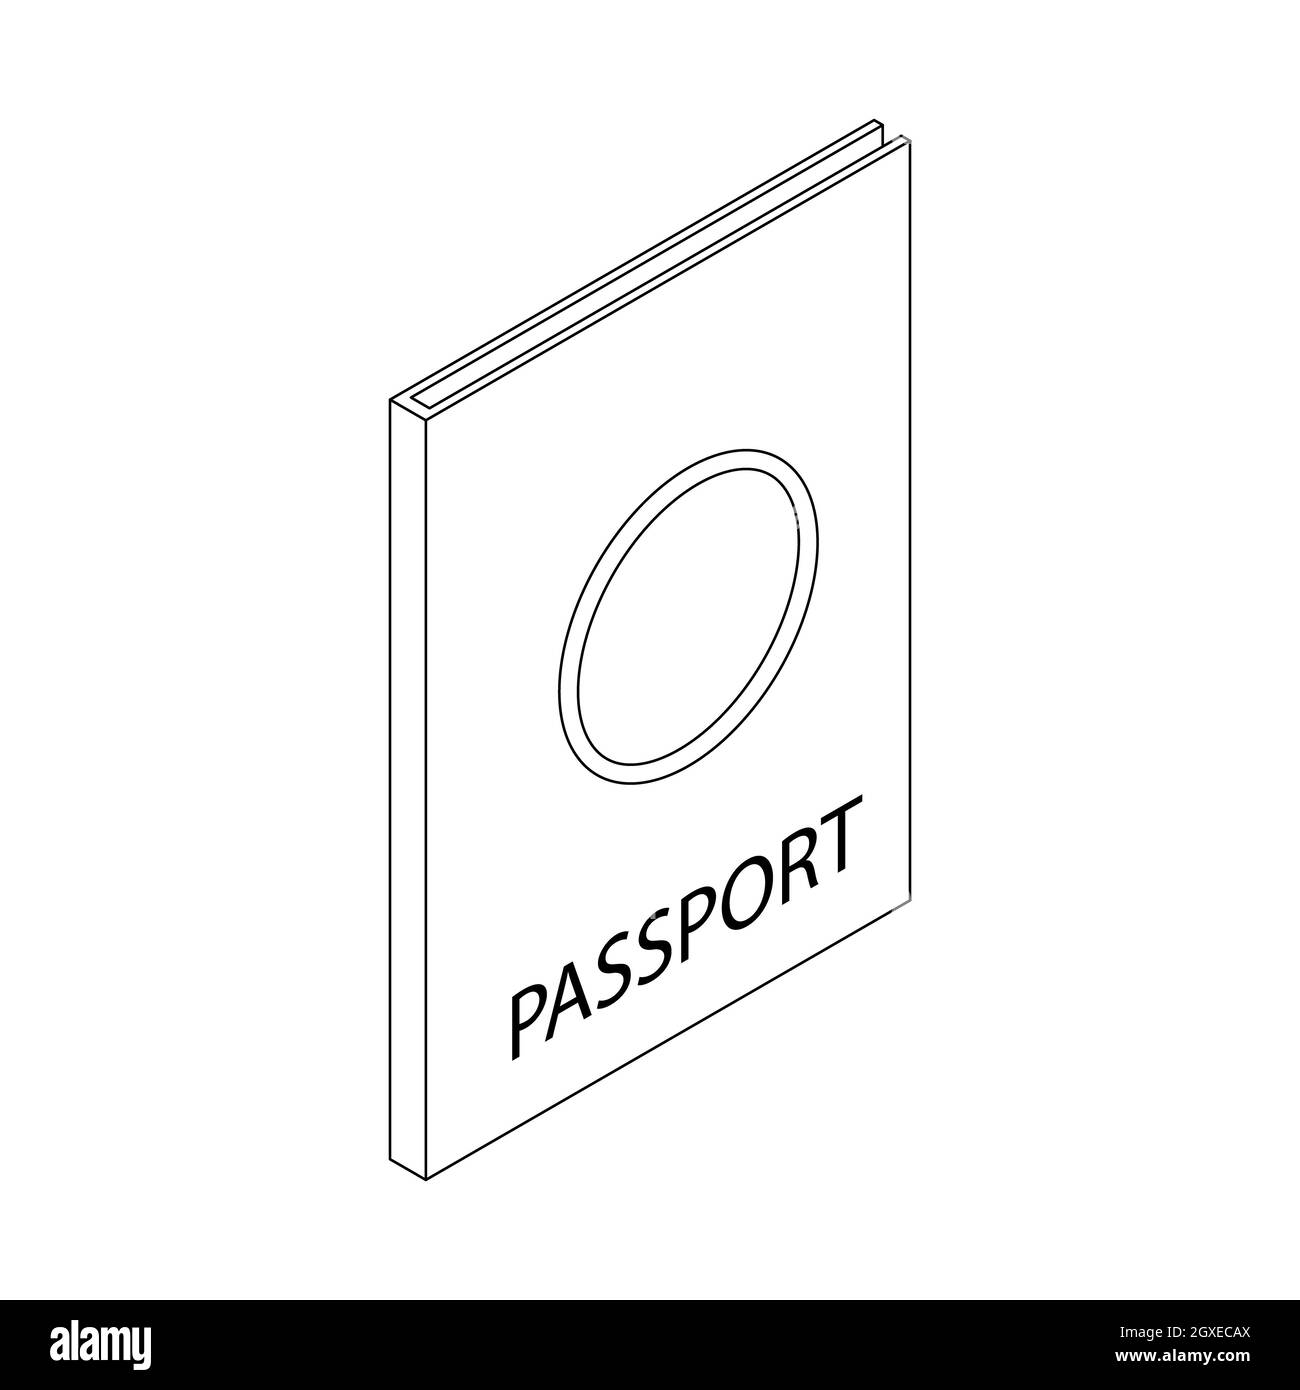 Passport icon in isometric 3d style isolated on white background Stock Photo